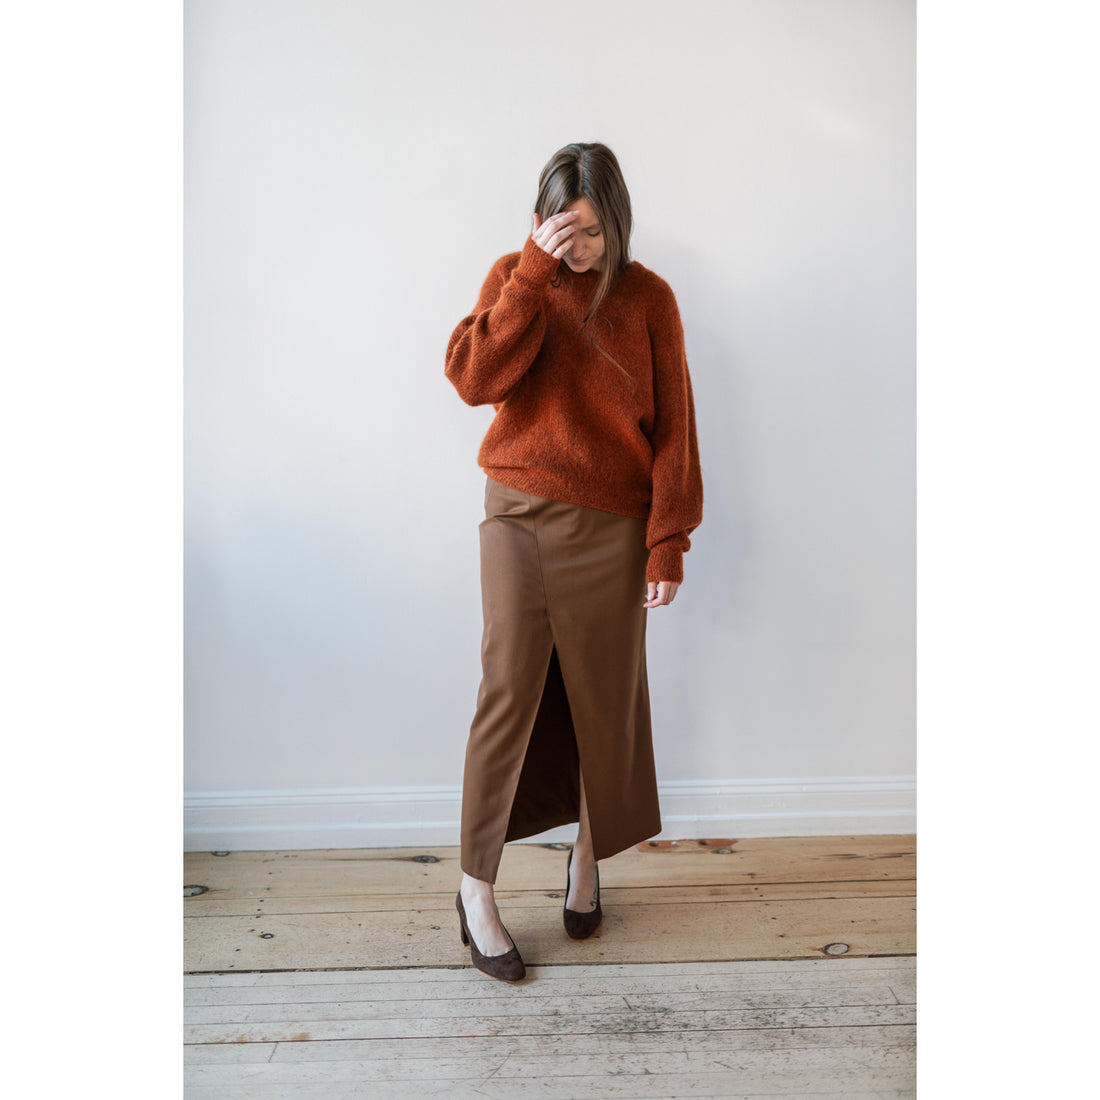 Hope Tail Skirt in Brown